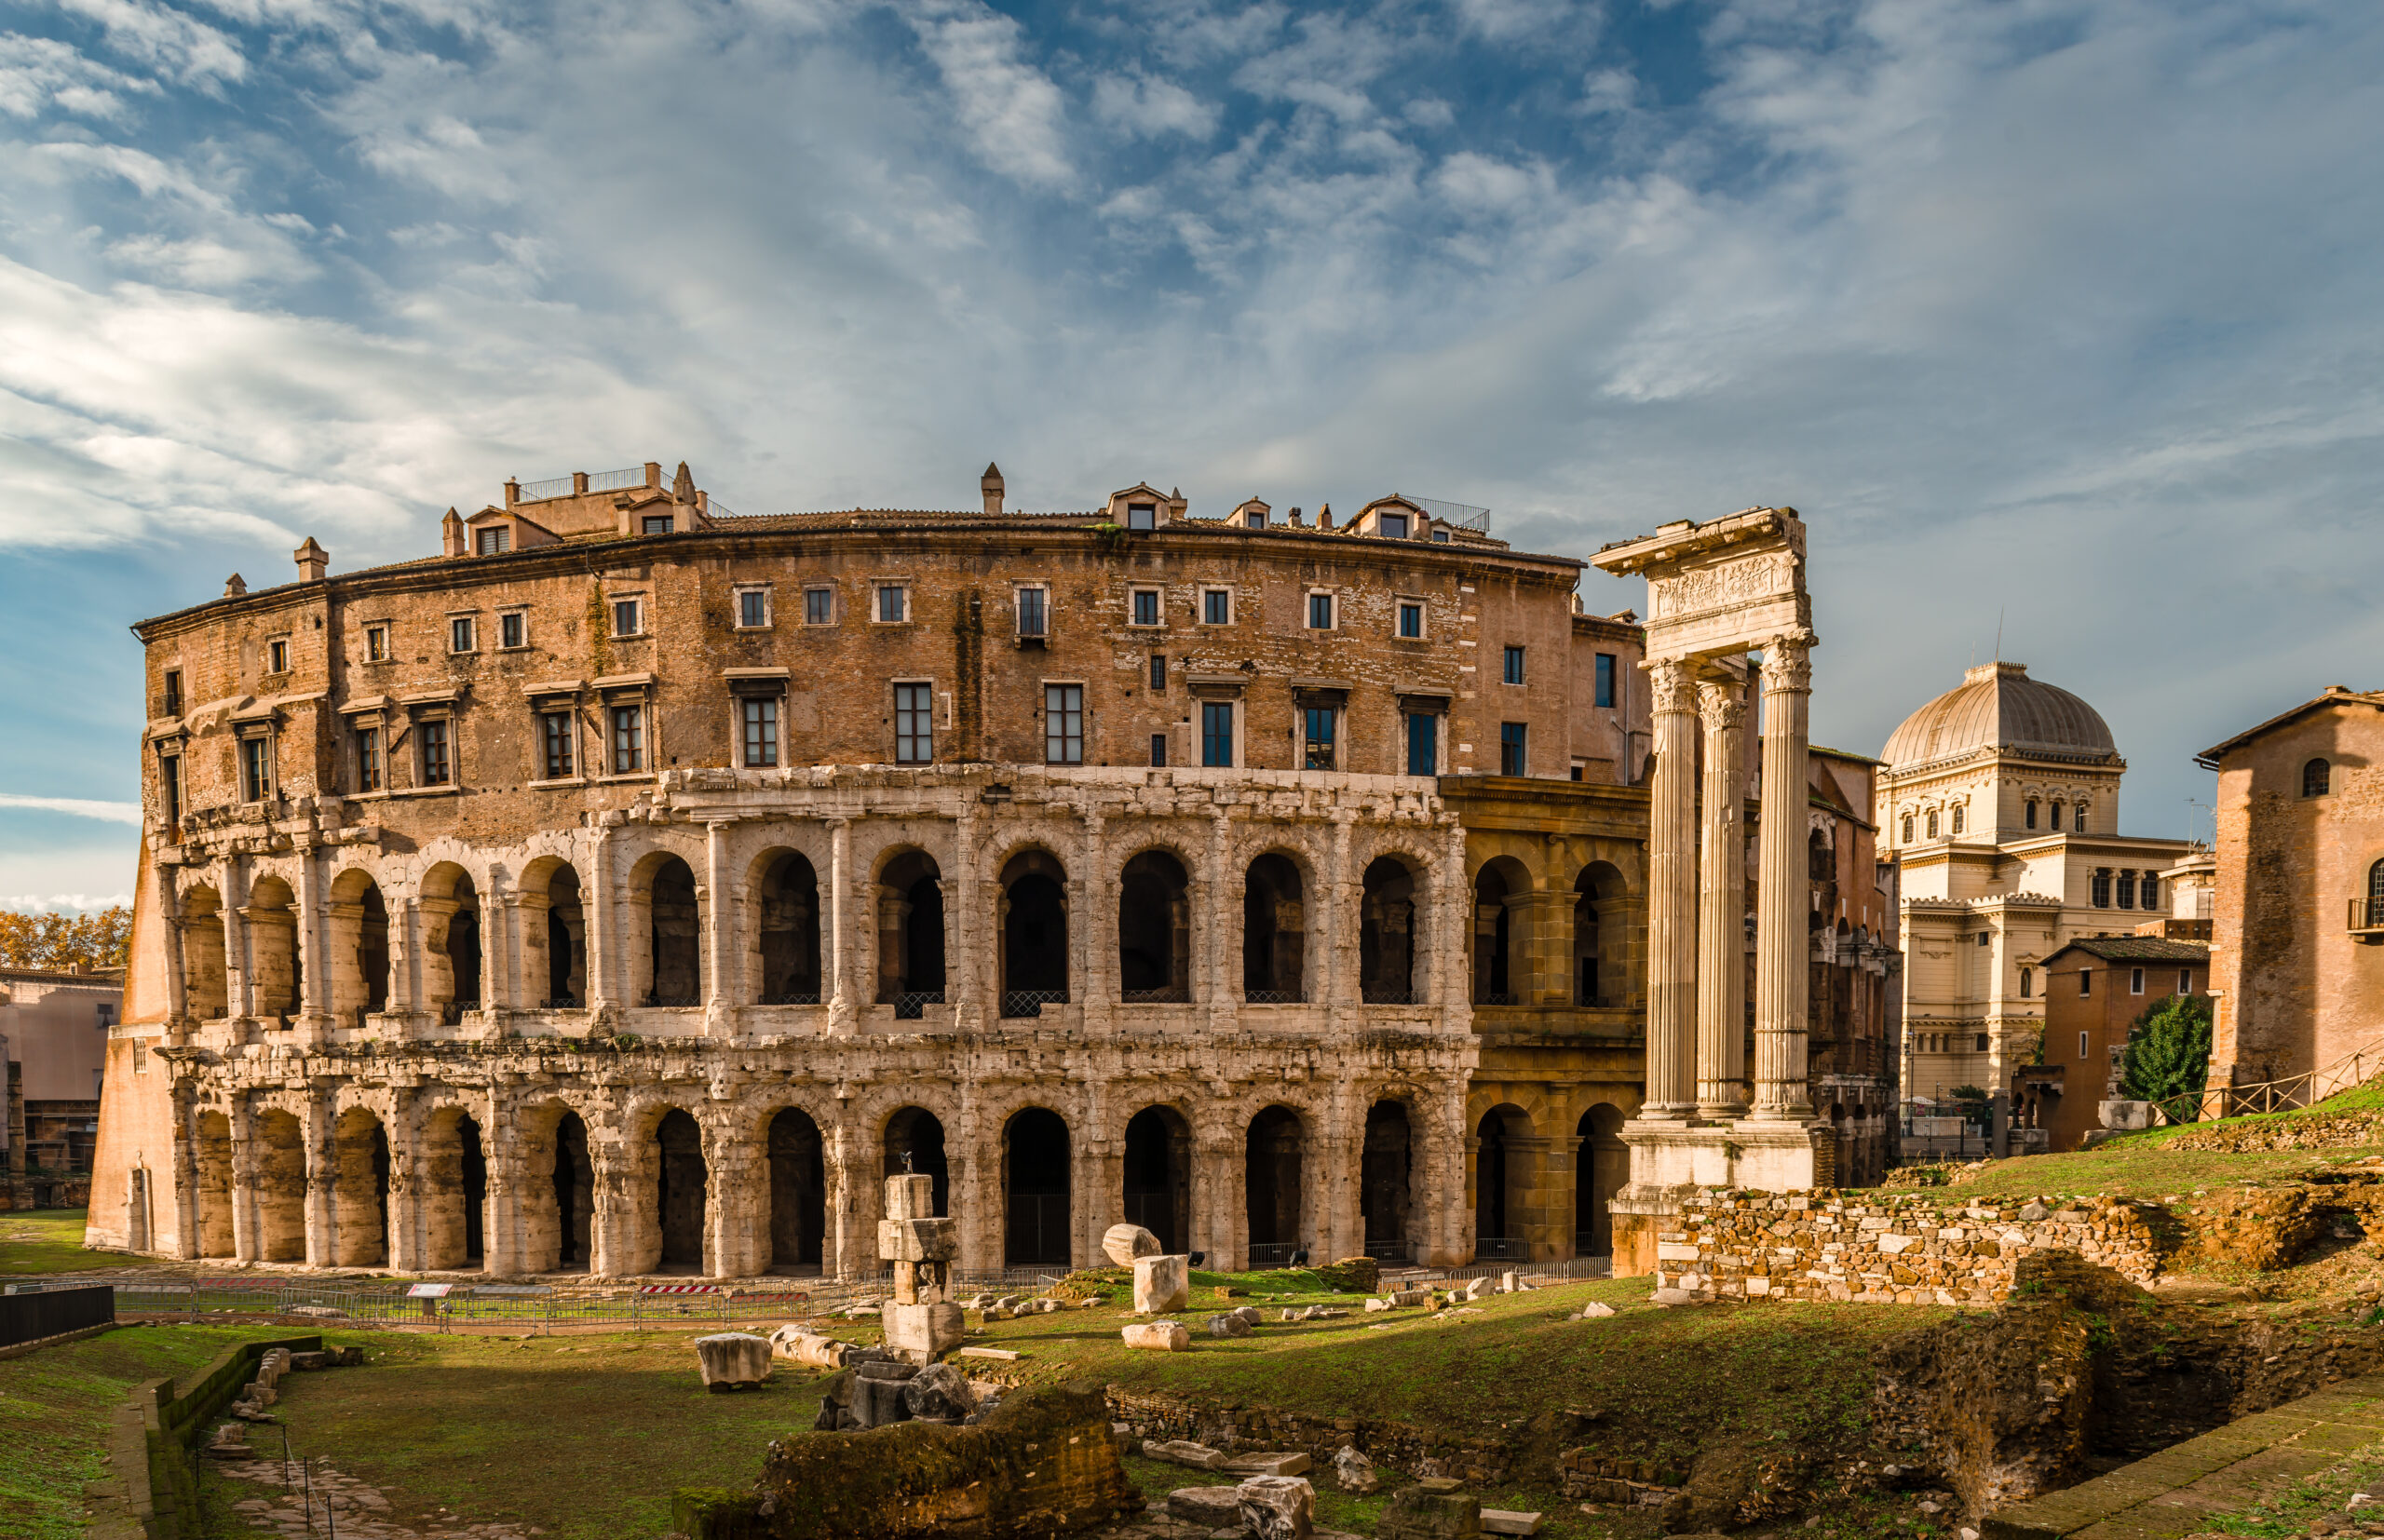 View of the ancient Teatro Marcello